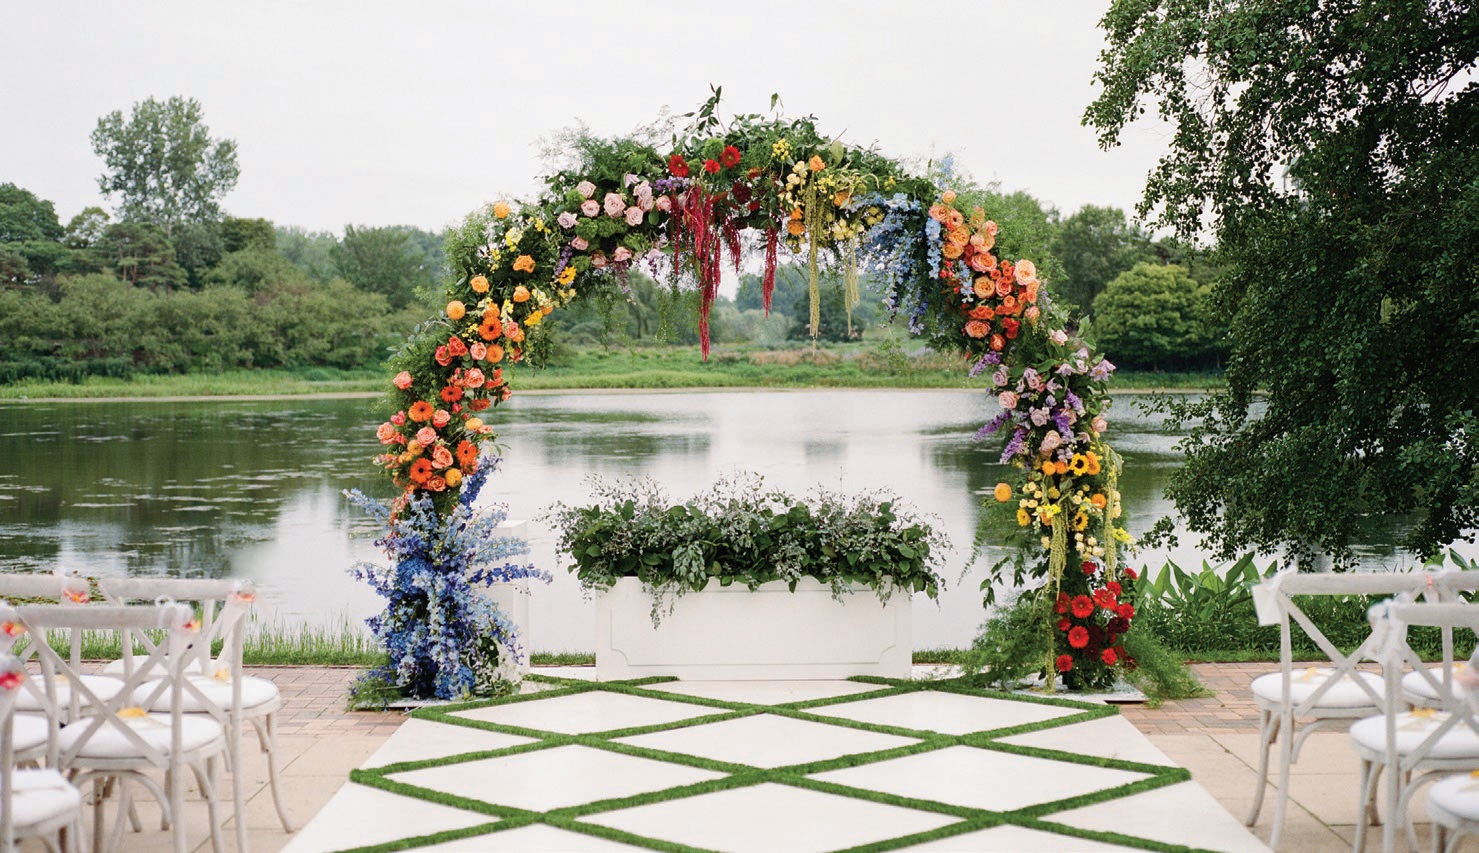 The ceremony setup featured a rainbow floral arch dreamt up by Jessica Griffin Pfluegl at HMR Designs. Photographed by Liz Banfield